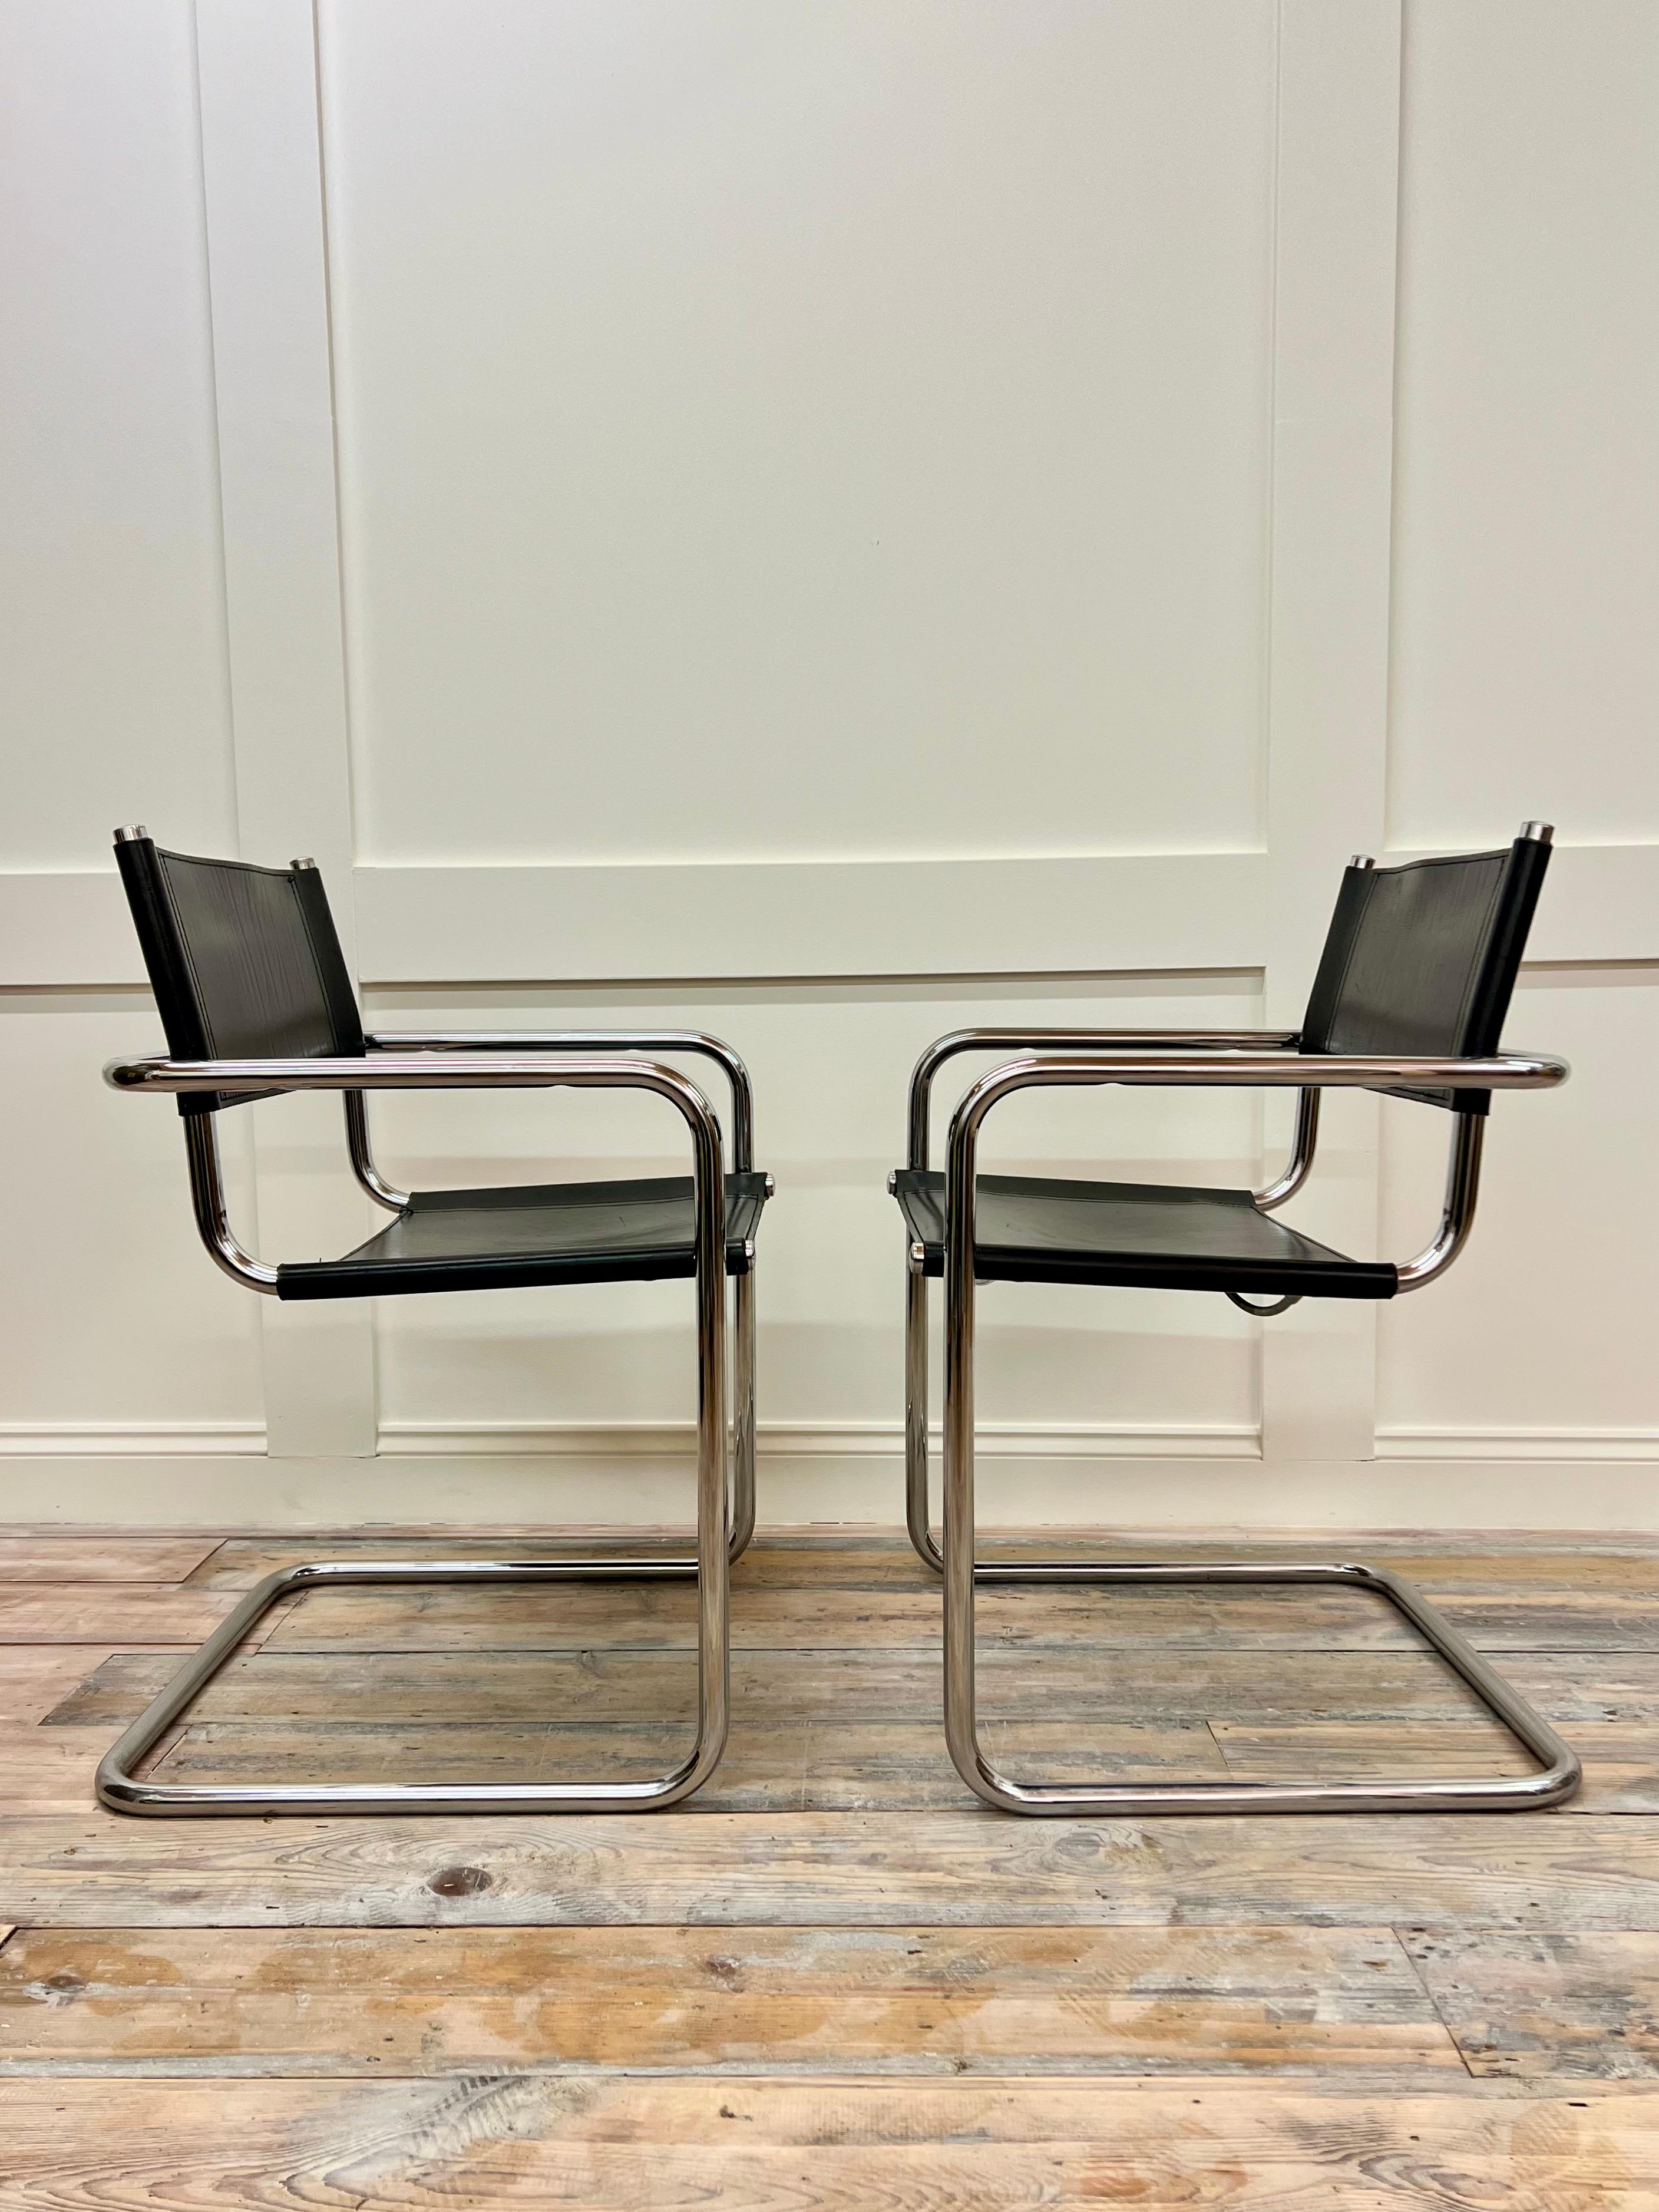 Metalwork Set of 2 Bauhaus Armchairs by Marcel Breuer B34 for Matteo Grassi, Italy c.1960